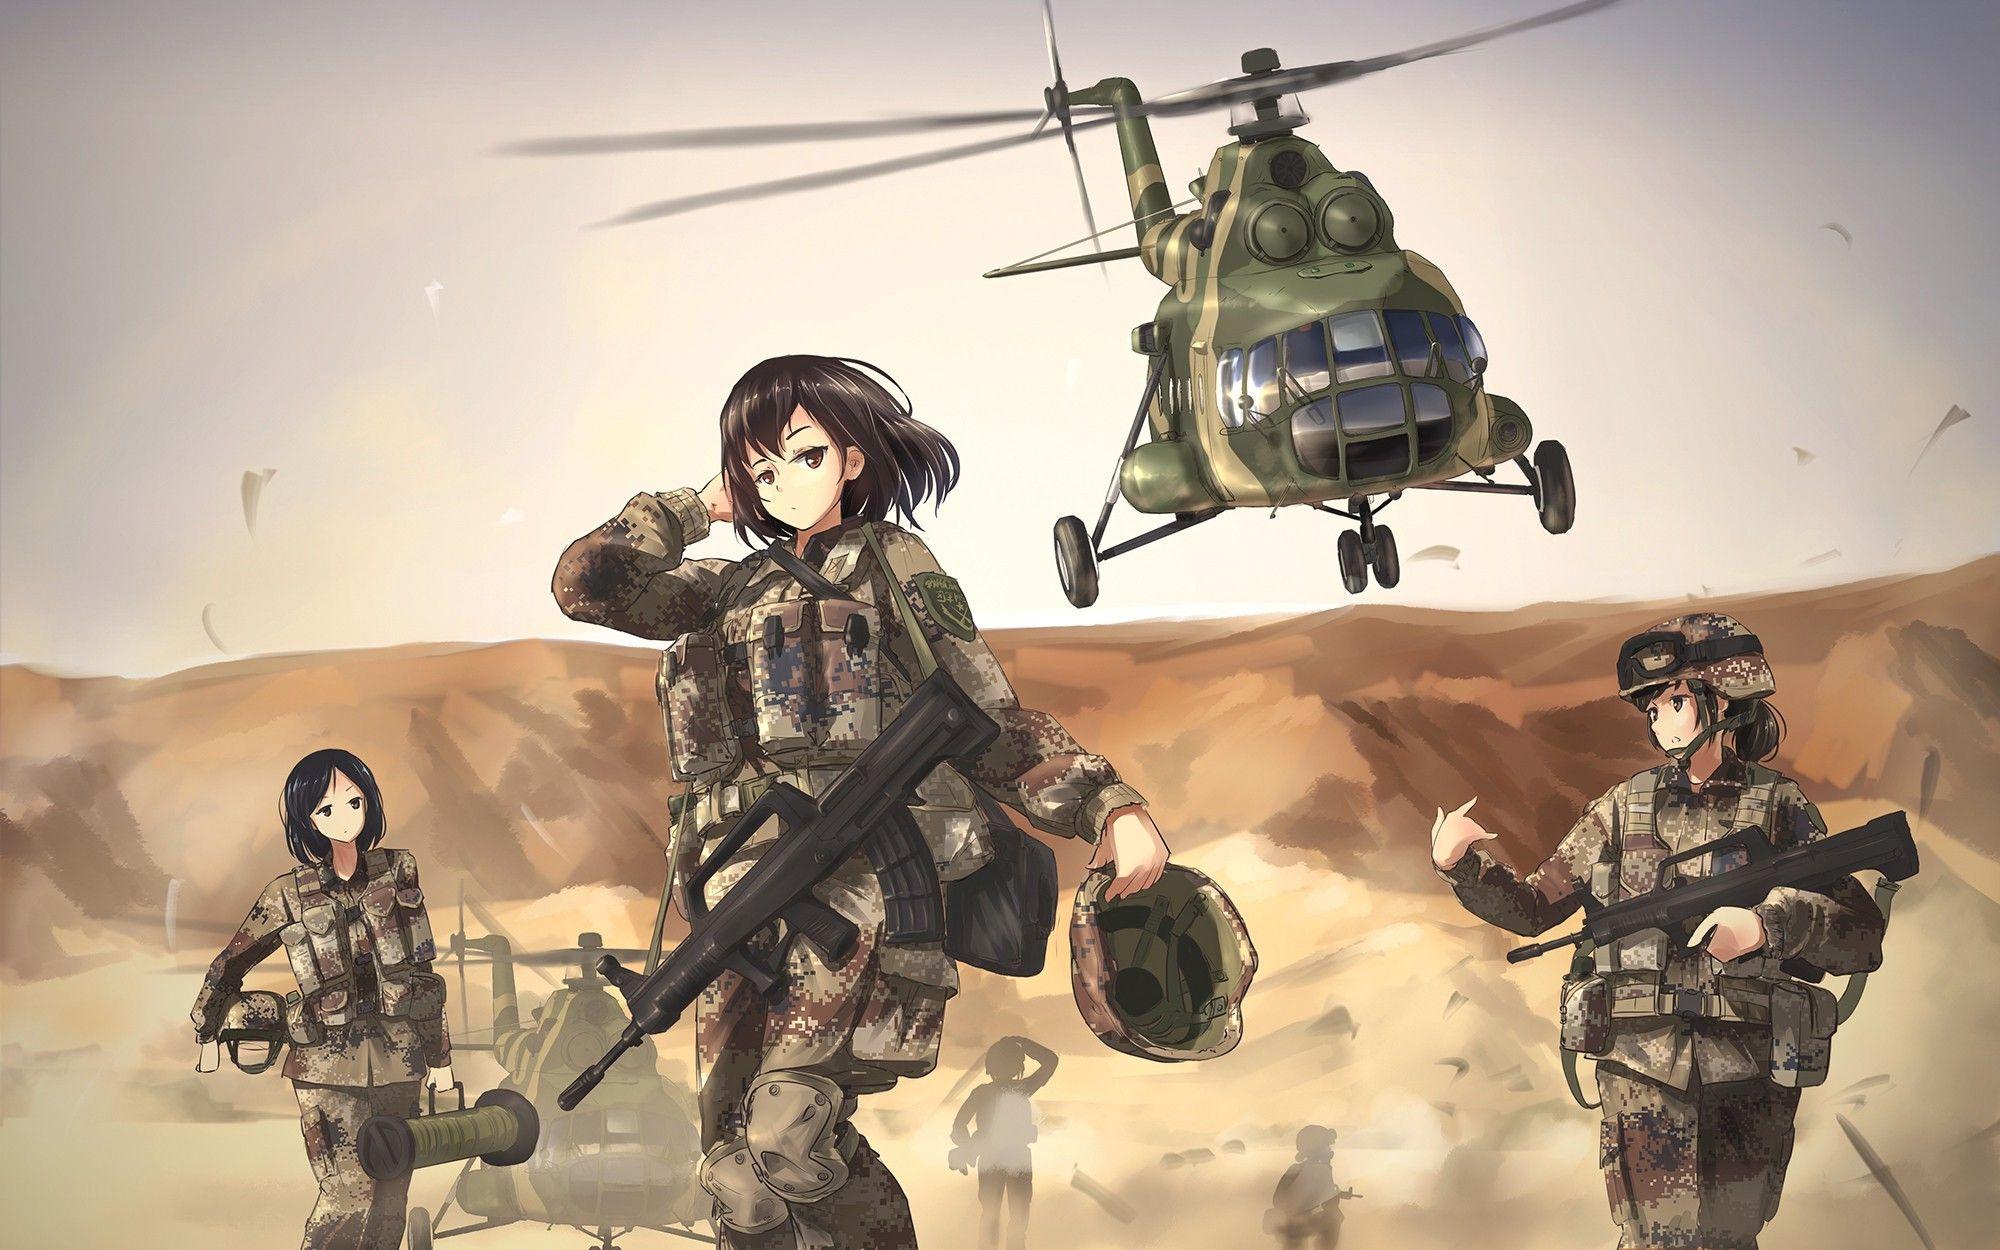 Wallpaper, women, anime girls, weapon, aircraft, soldier, military